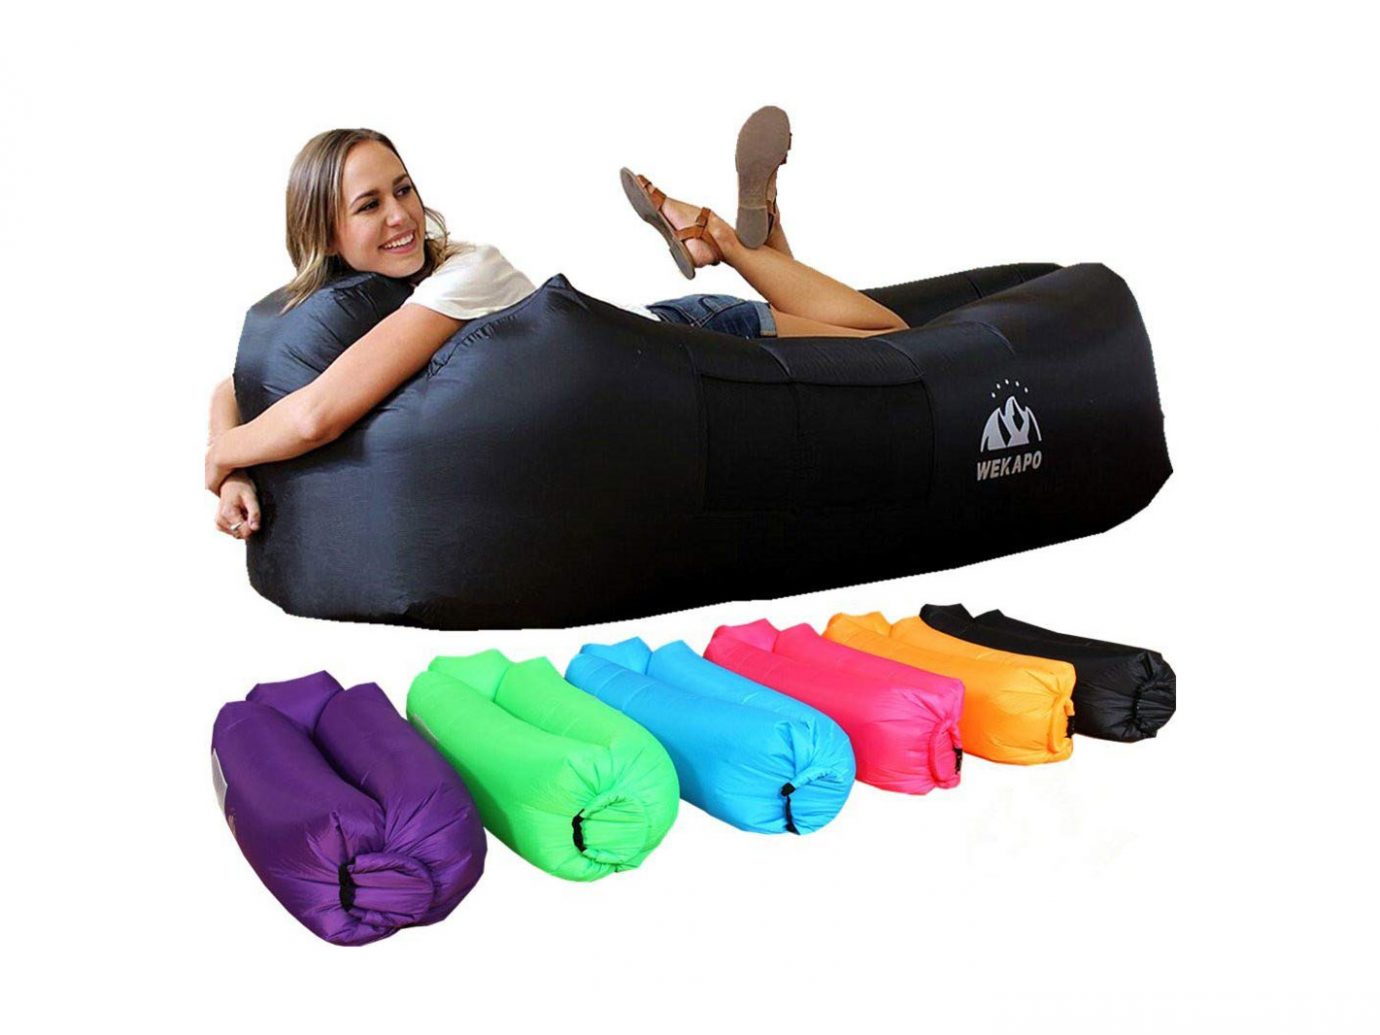 WEKAPO Inflatable Lounger for beach